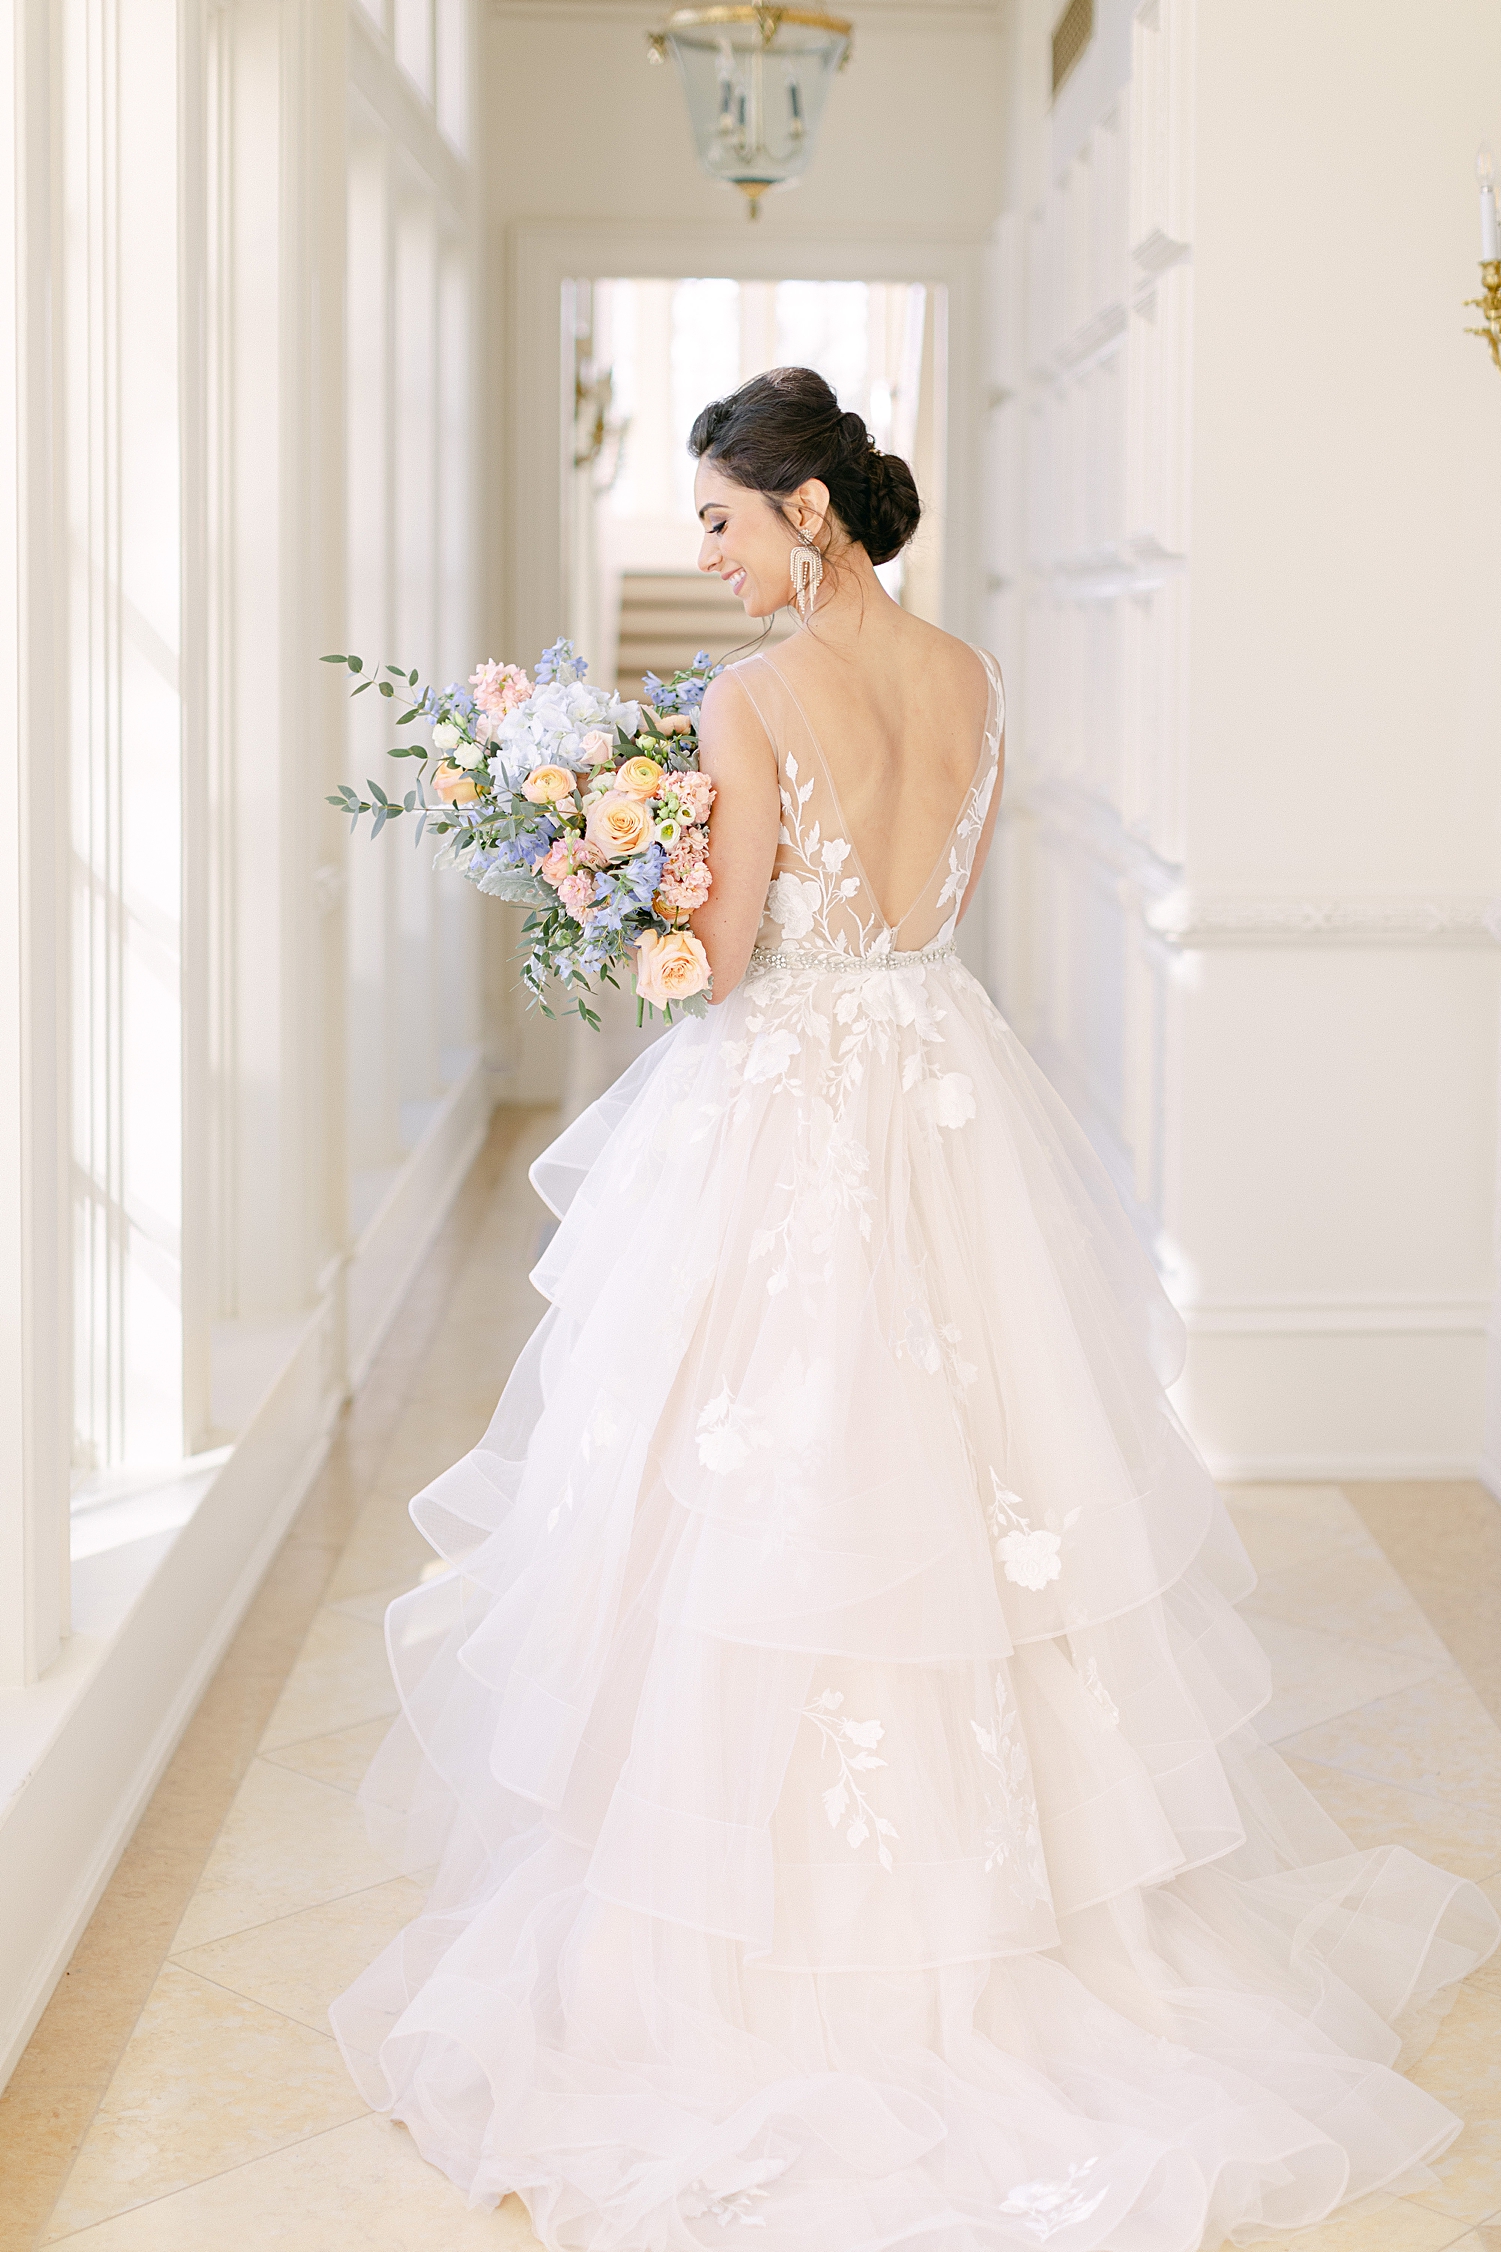 Bride in wedding dress standing in white hallway holding colorful floral bouquet